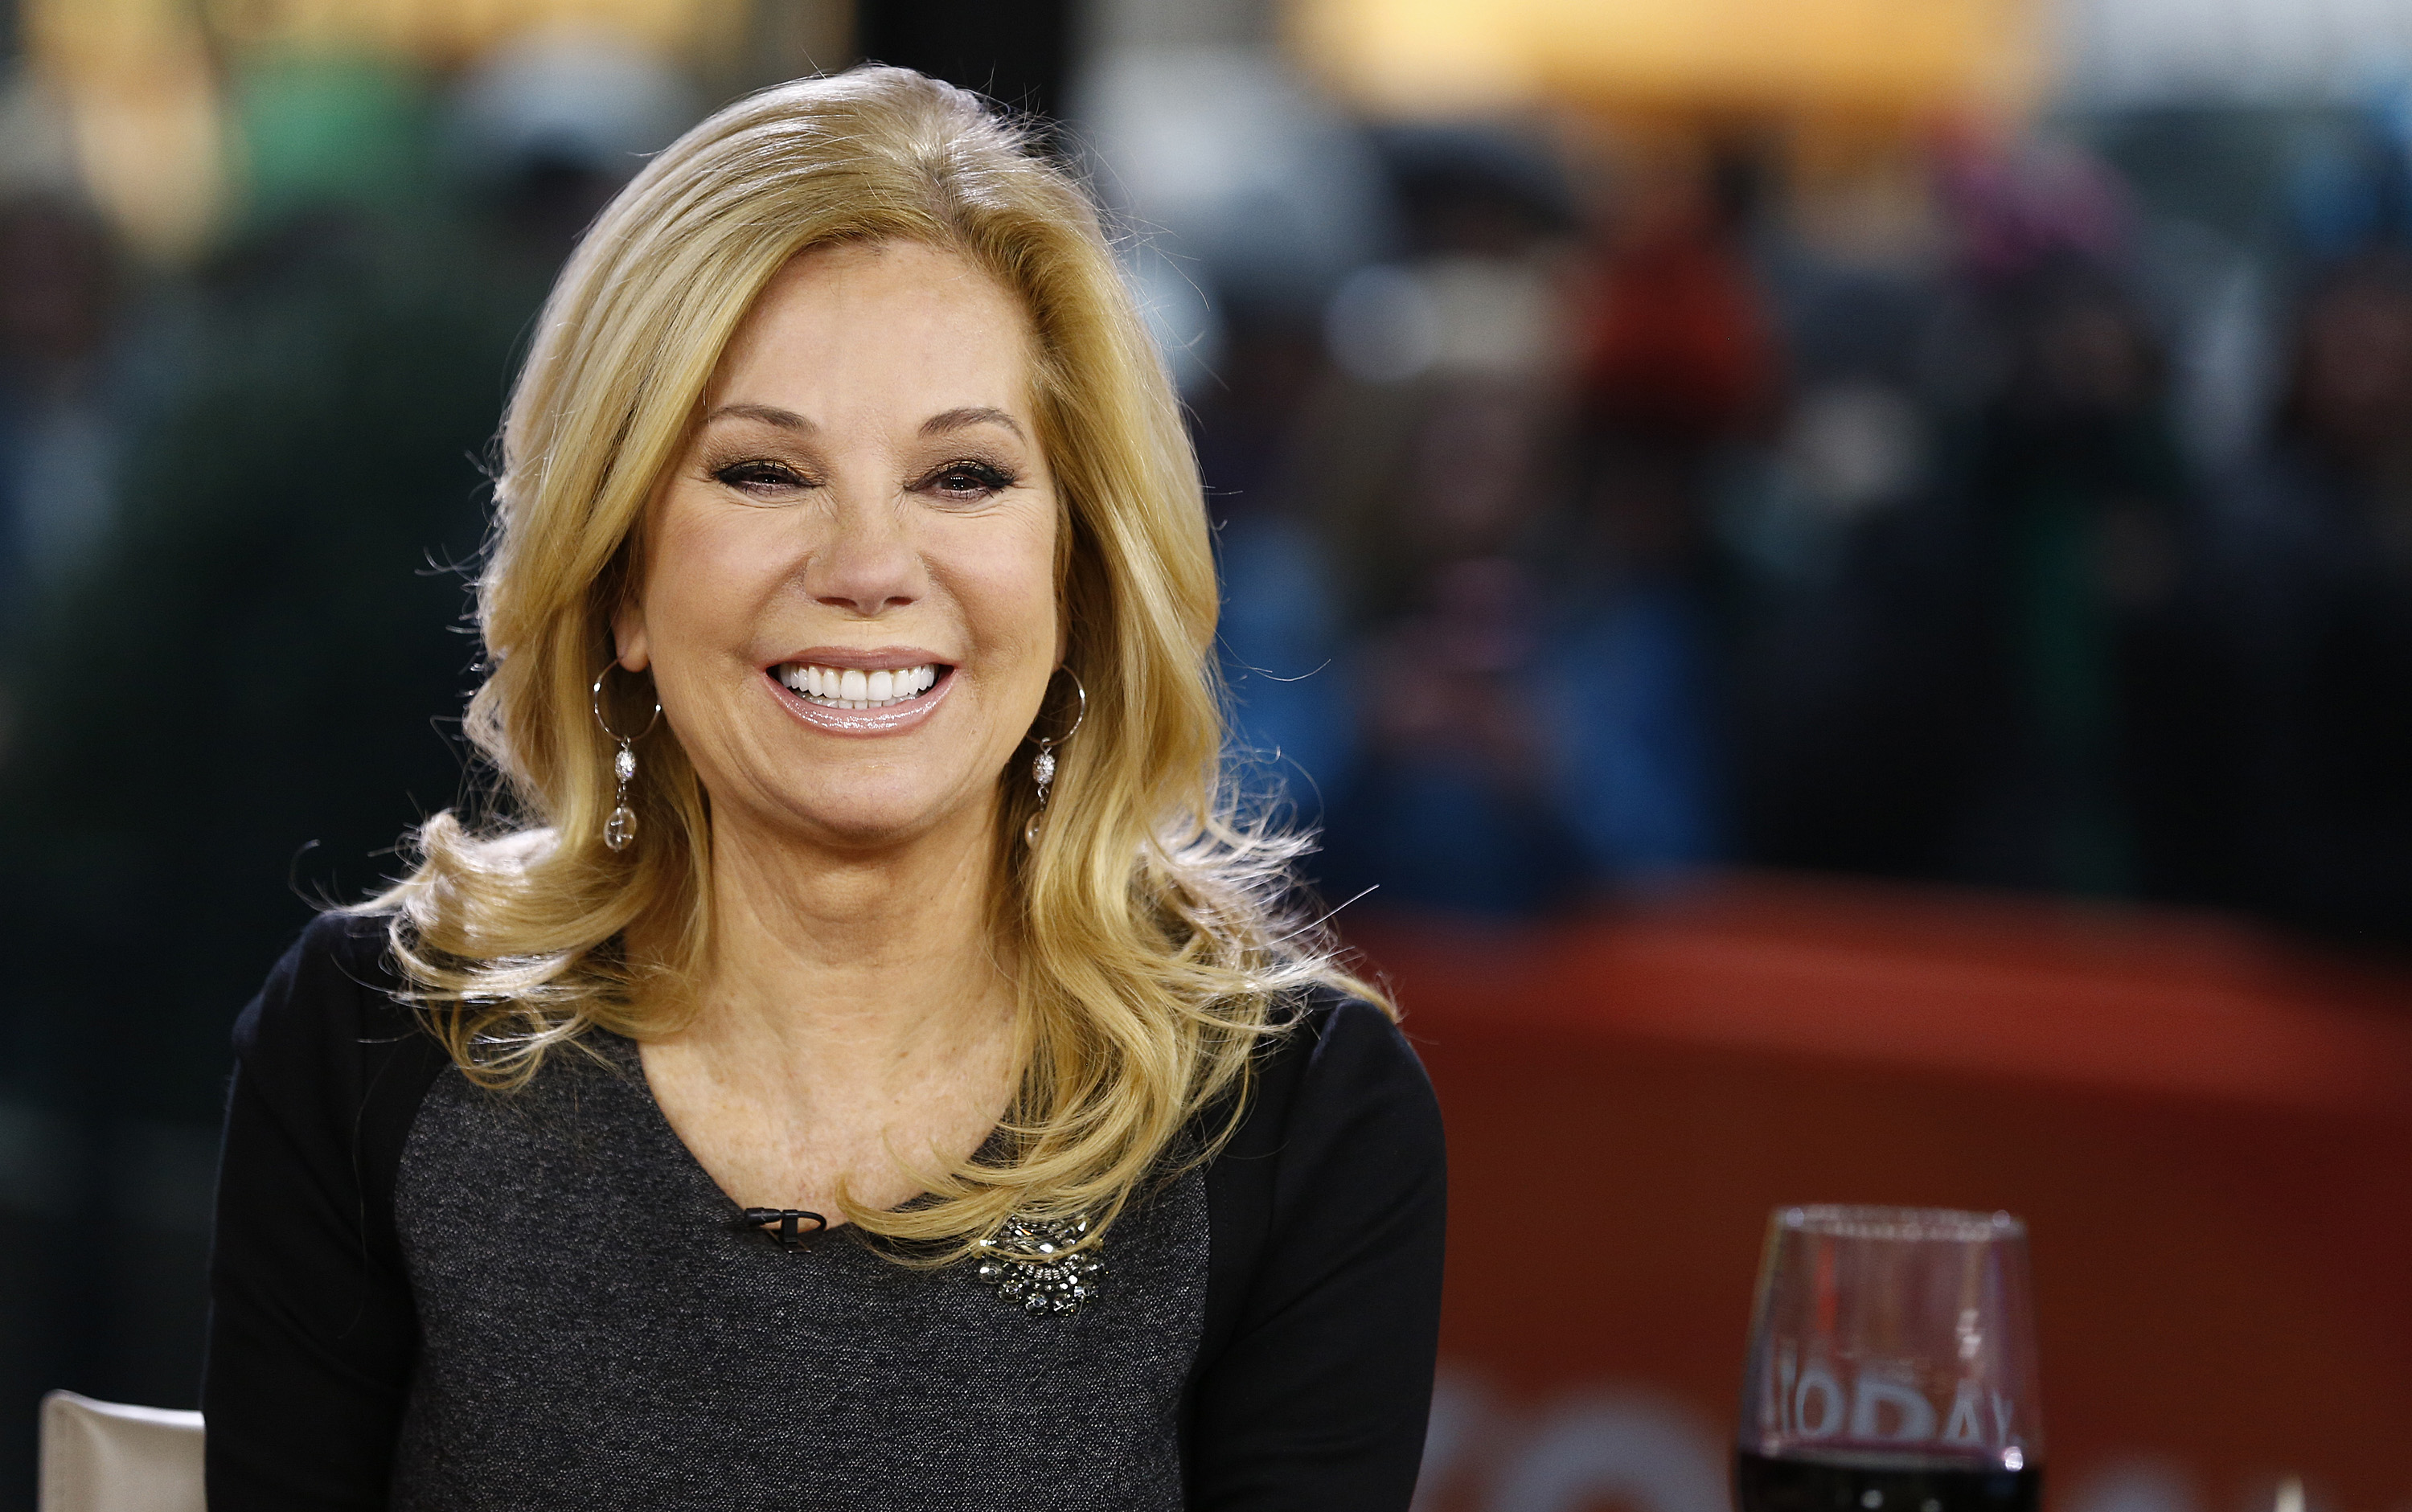 Kathie Lee Gifford appears on NBC News' "Today" show on December 17, 2013 | Source: Getty Images